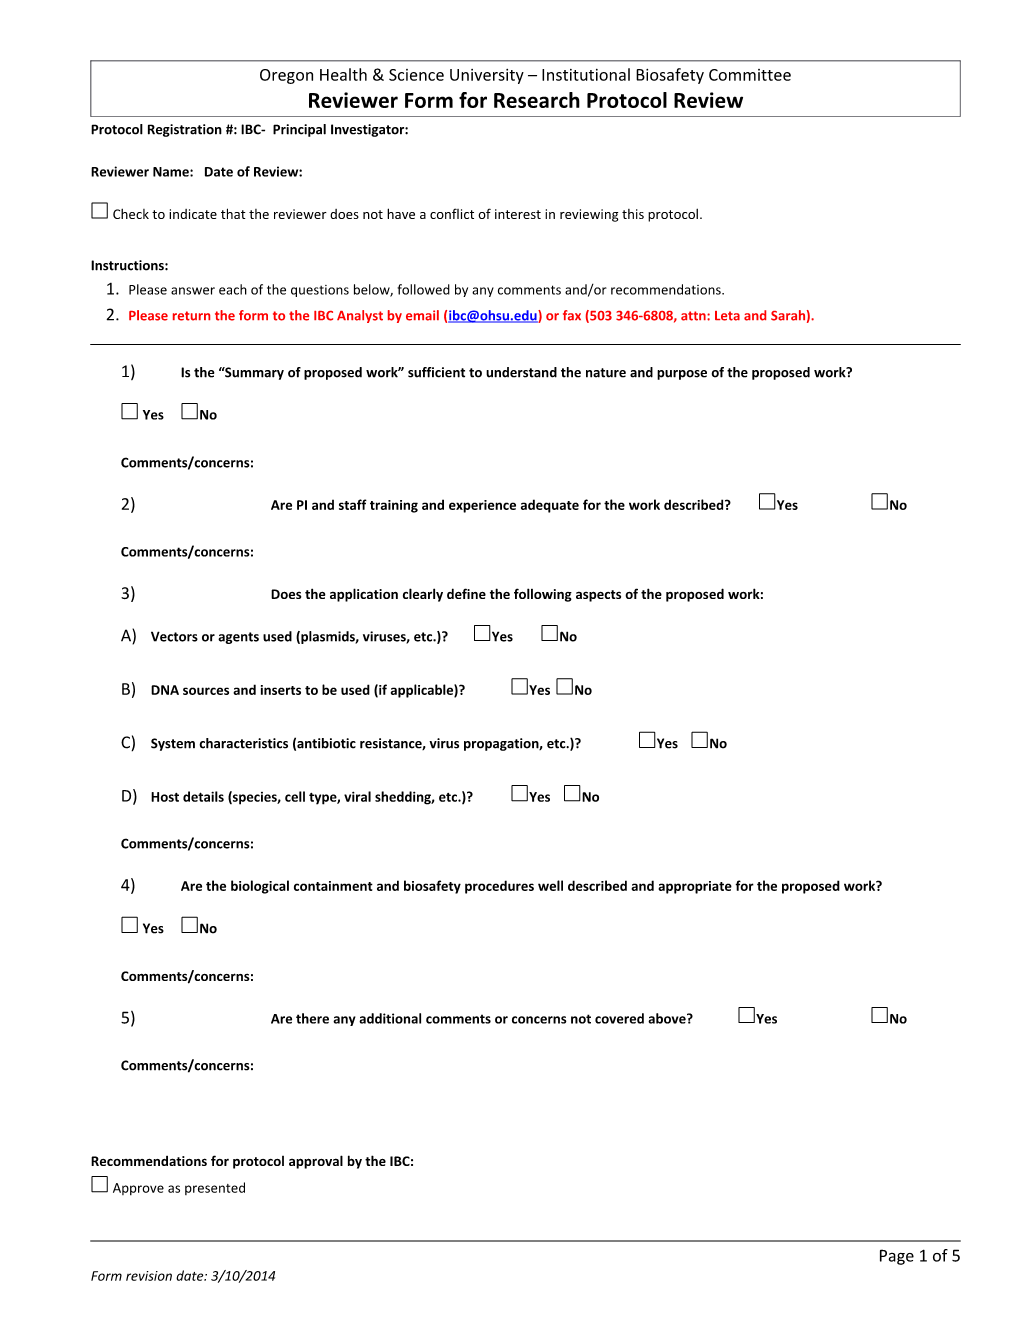 Reviewer Form for Research Protocol Review